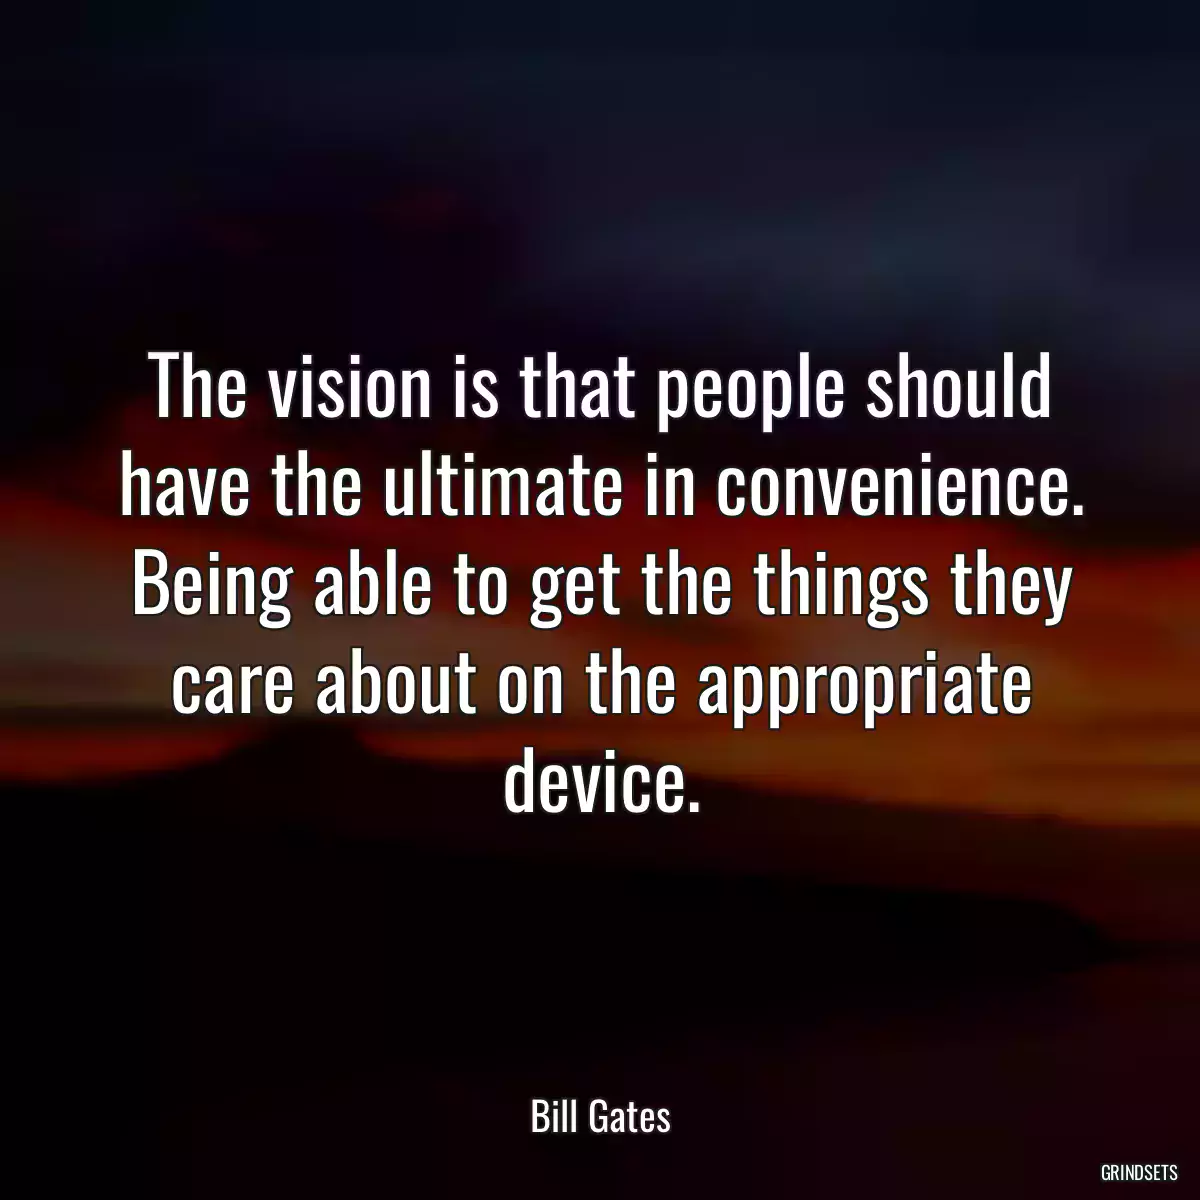 The vision is that people should have the ultimate in convenience. Being able to get the things they care about on the appropriate device.